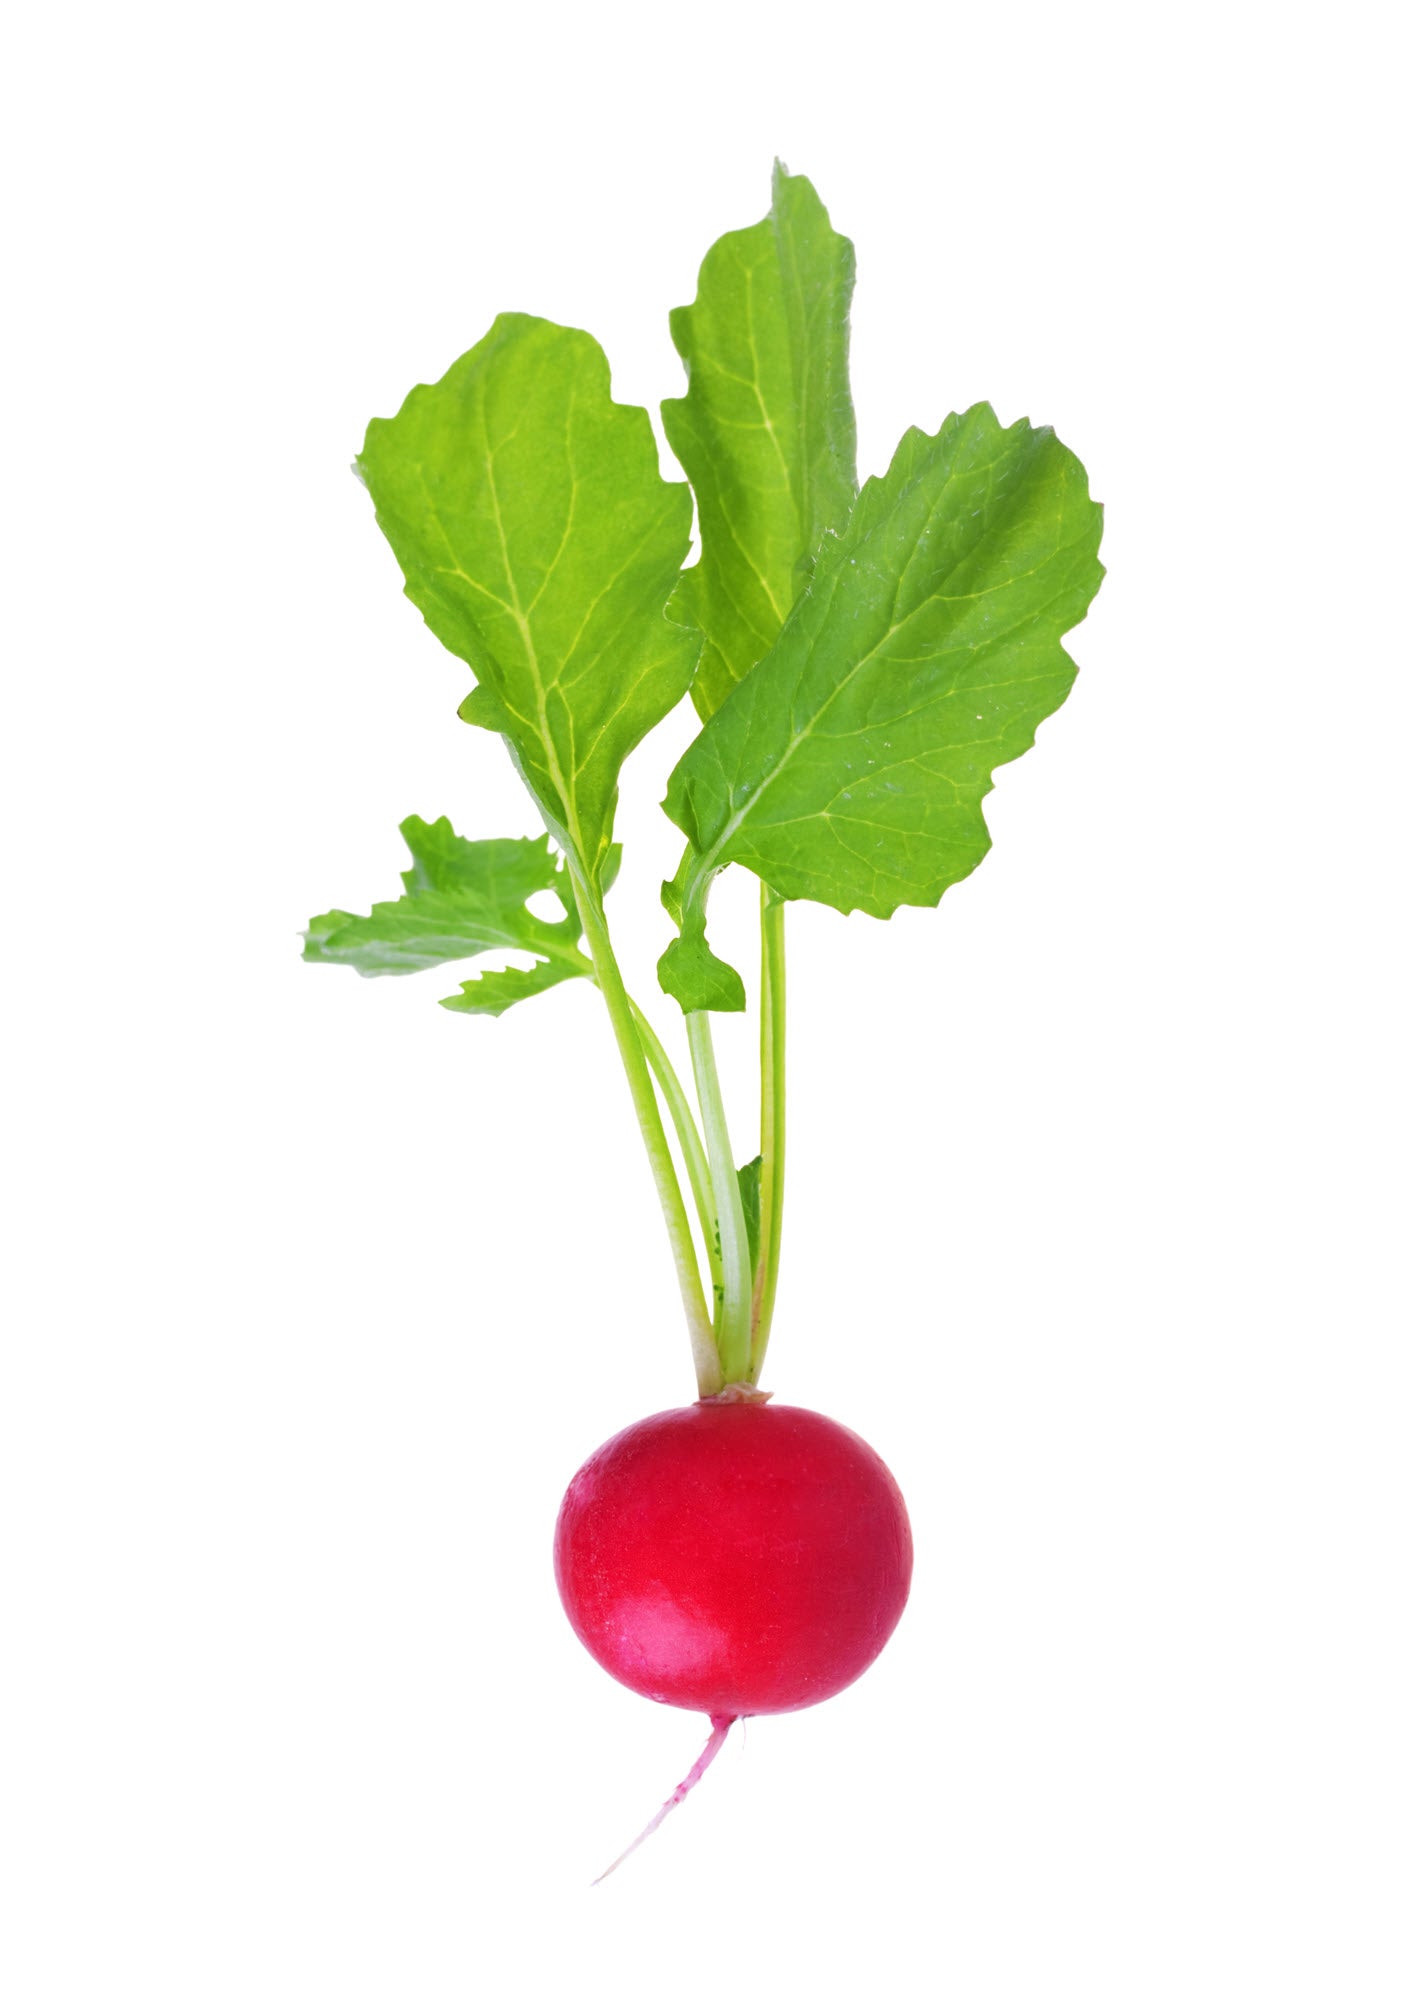 On display is a single radishes, of the variety Champion. The radish appears to be freshly harvested, and fully washed, with its stalk still intact.  The radish is placed onto a white surface, in a north to south orientation. 